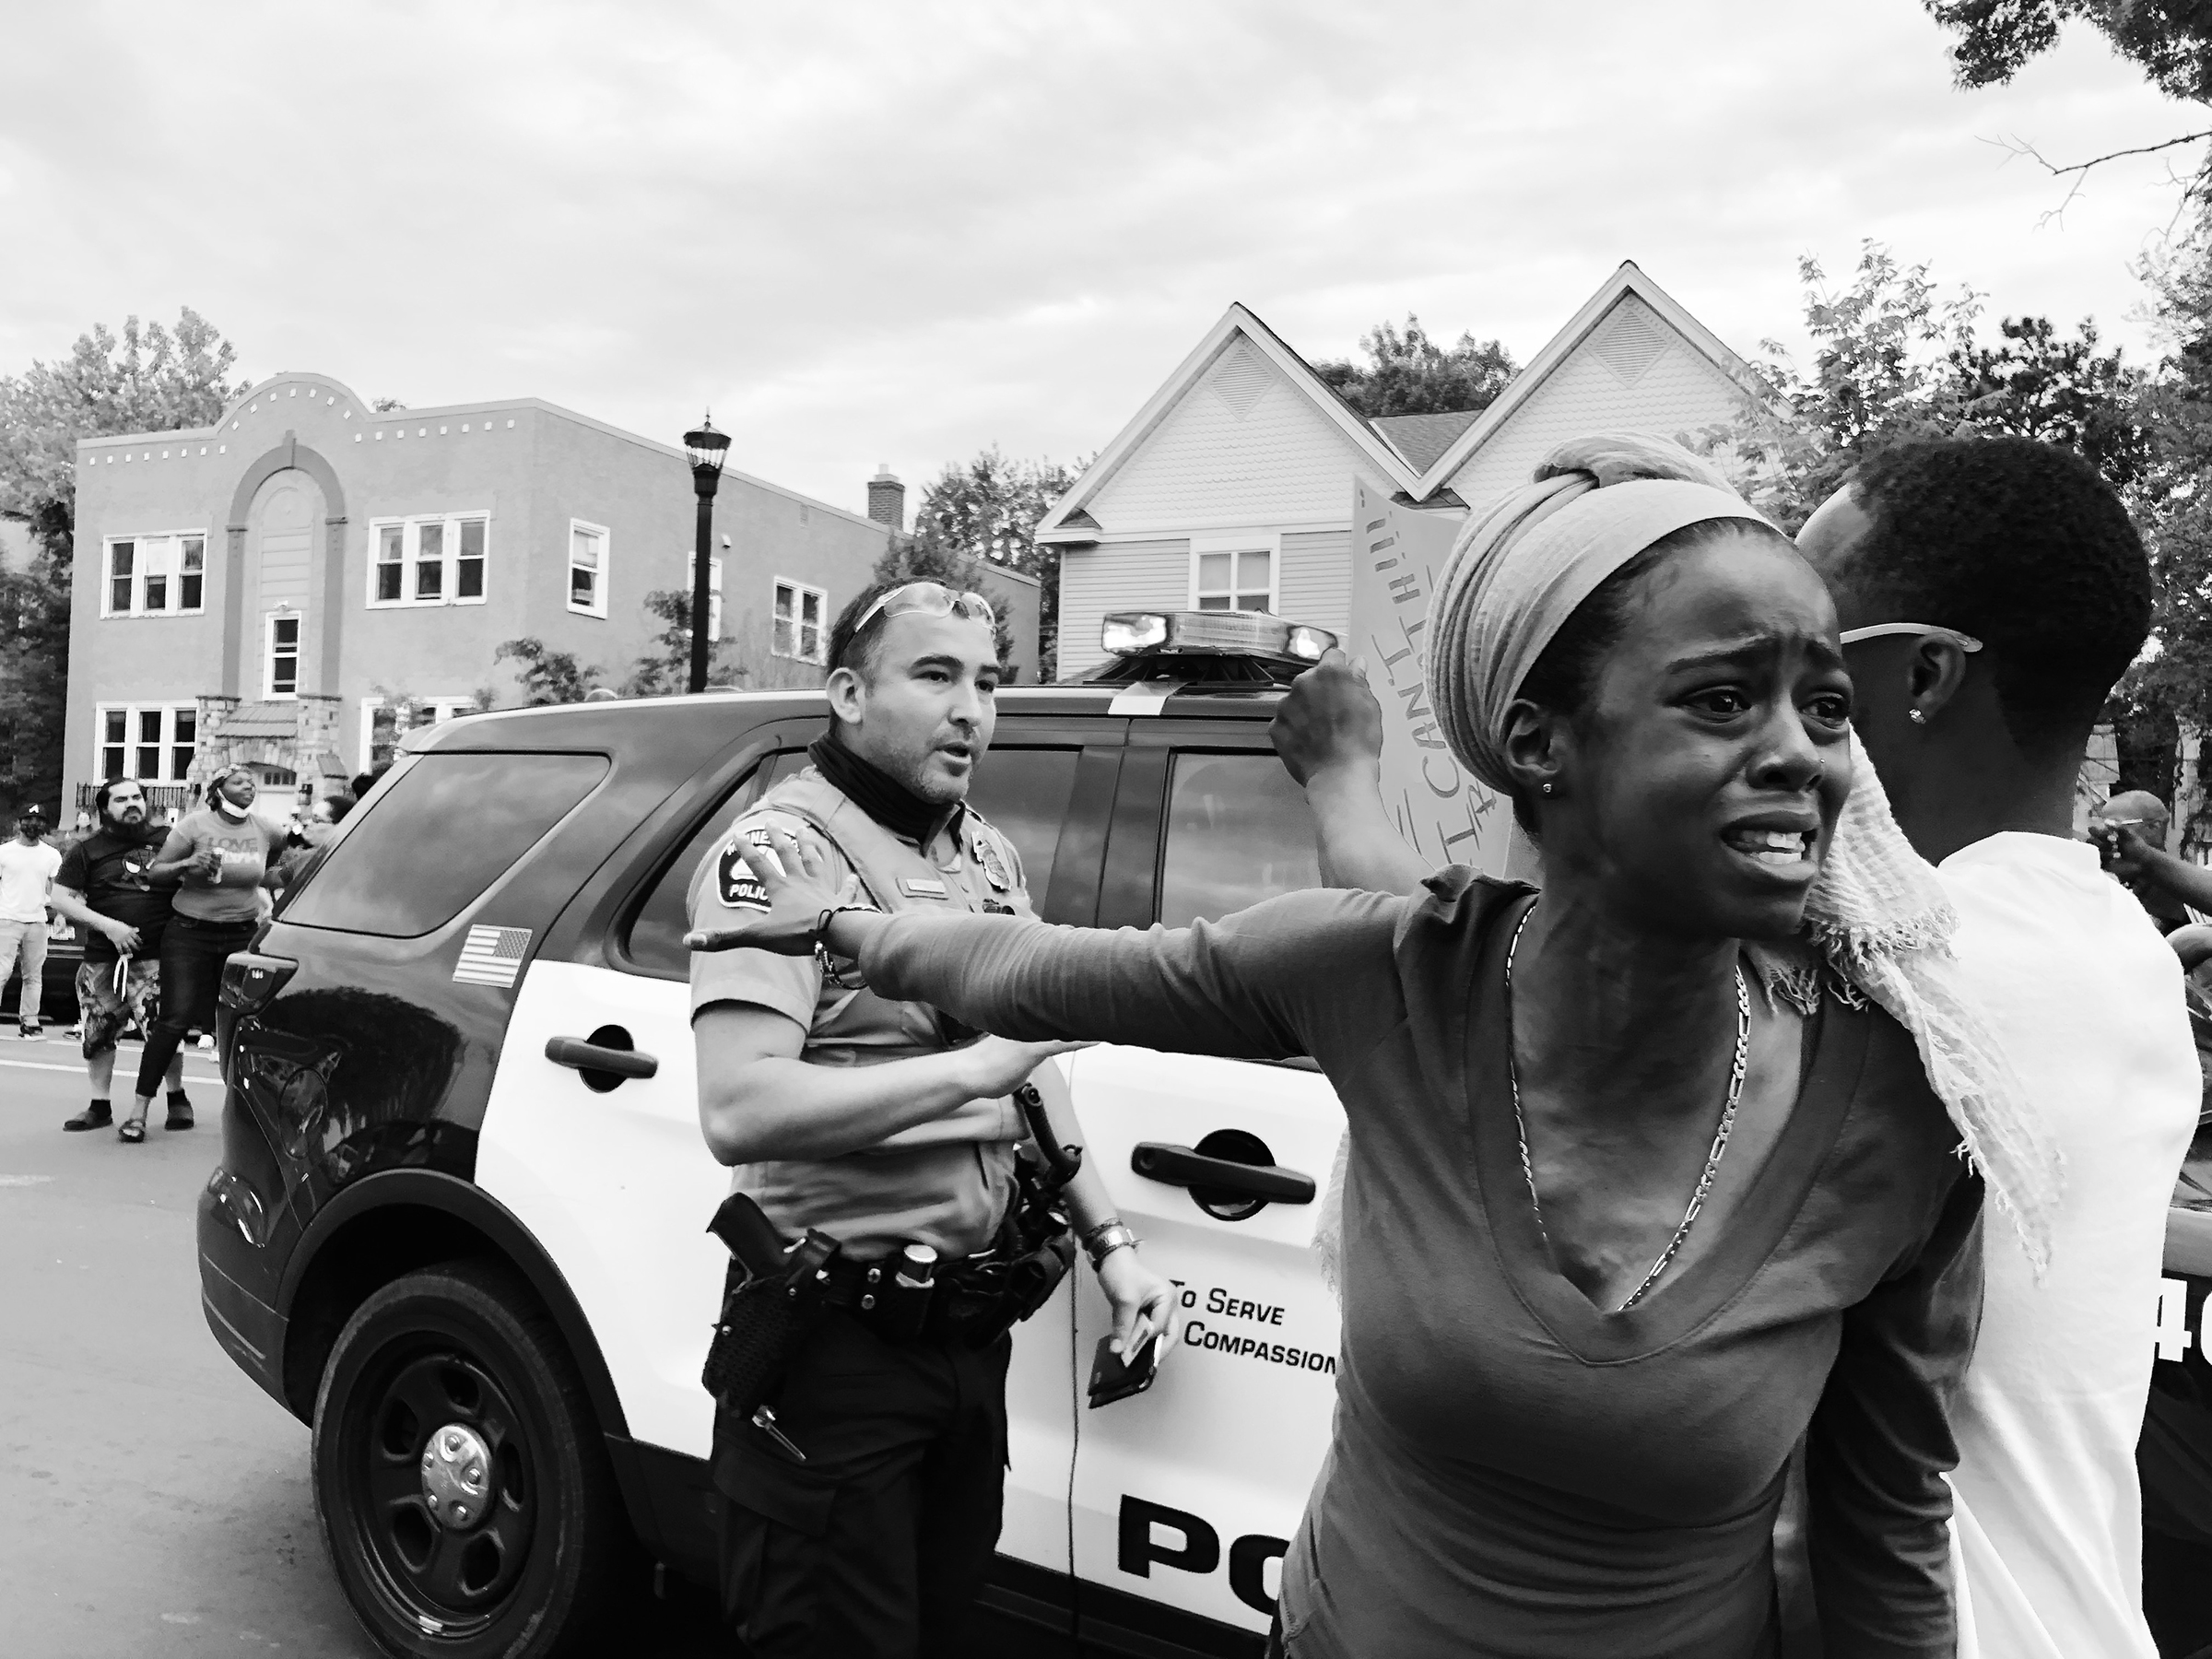 A woman outraged by the killing of George Floyd speaks to a crowd and blocks a police officer's vehicle with a group of protesters in Minneapolis on May 27, 2020.